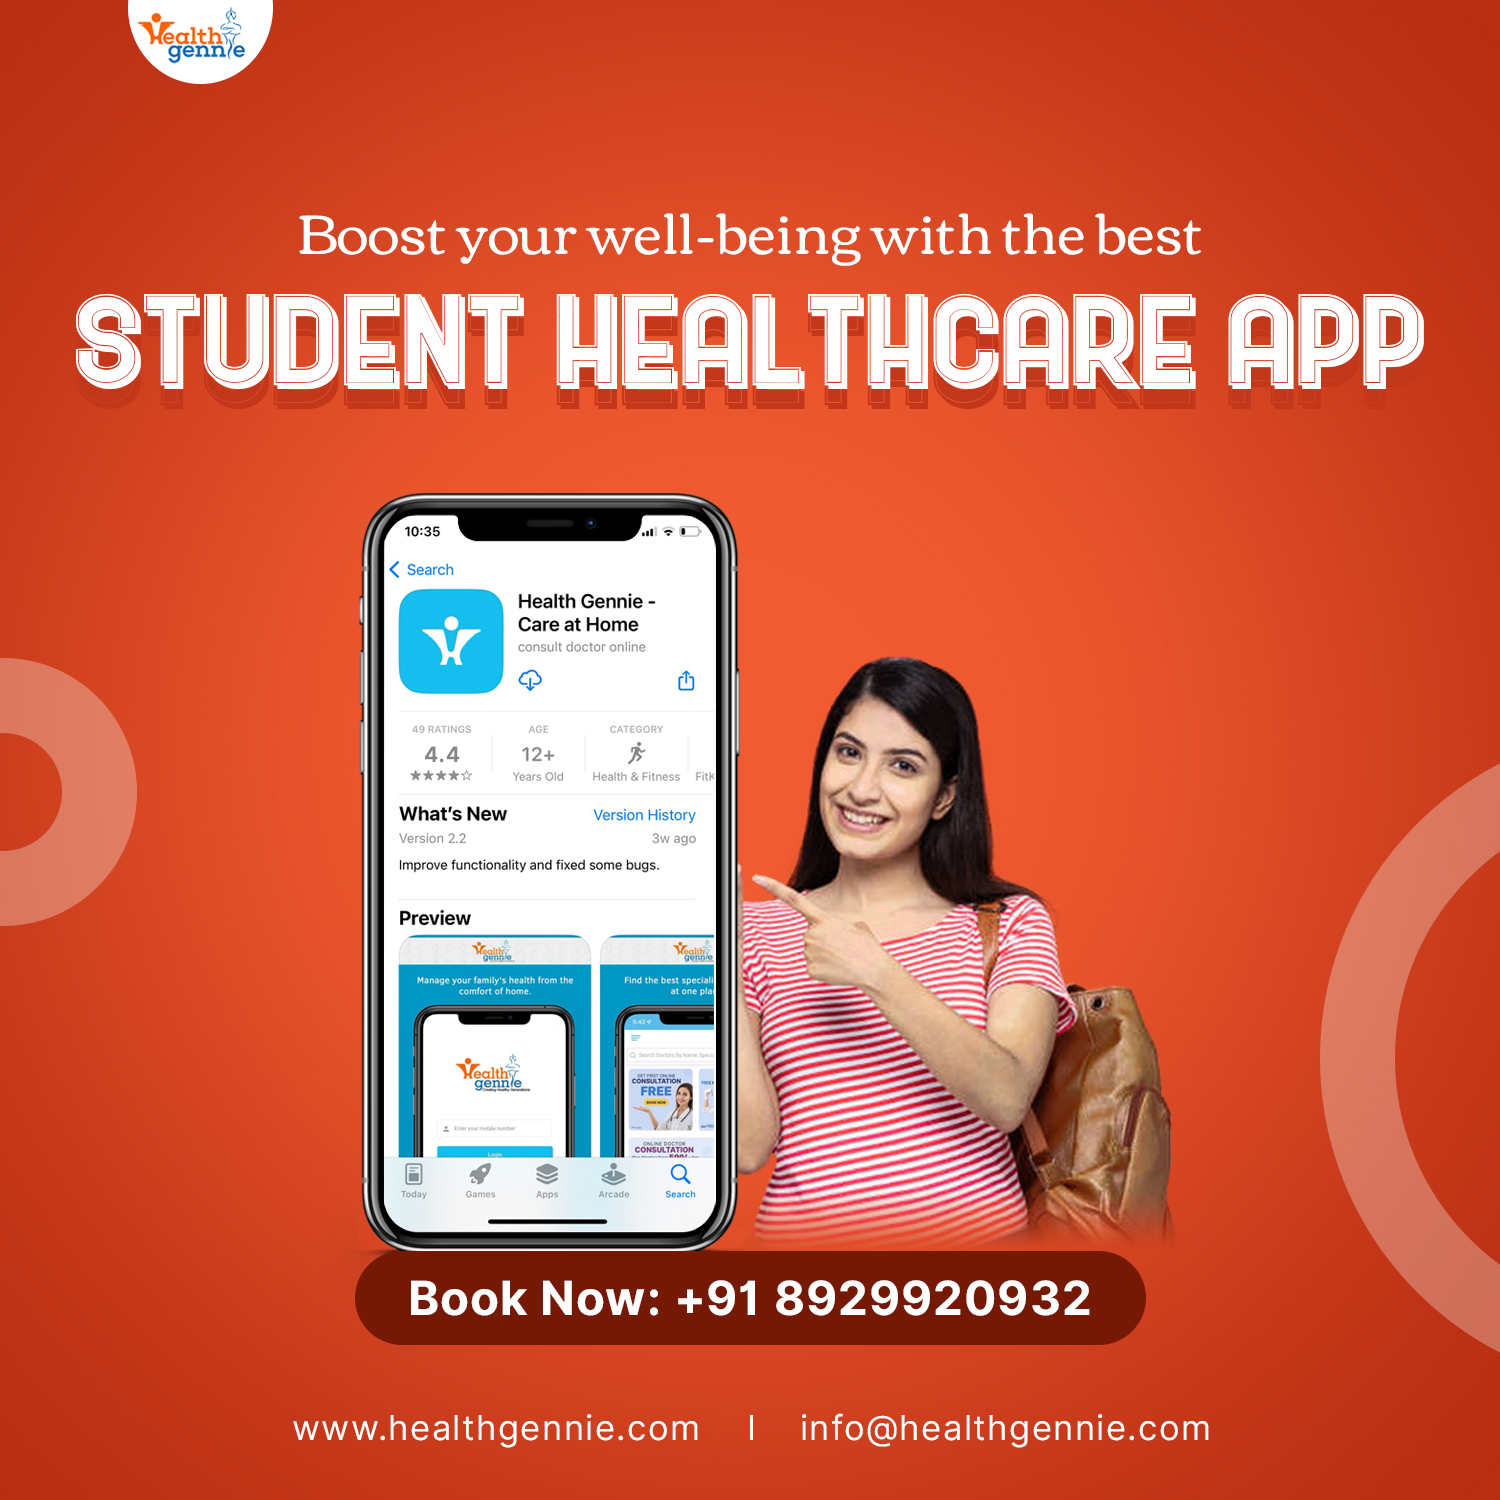 Boost Your Wellbeing with the Best Student Healthcare App - Bihar - Patna ID1545559